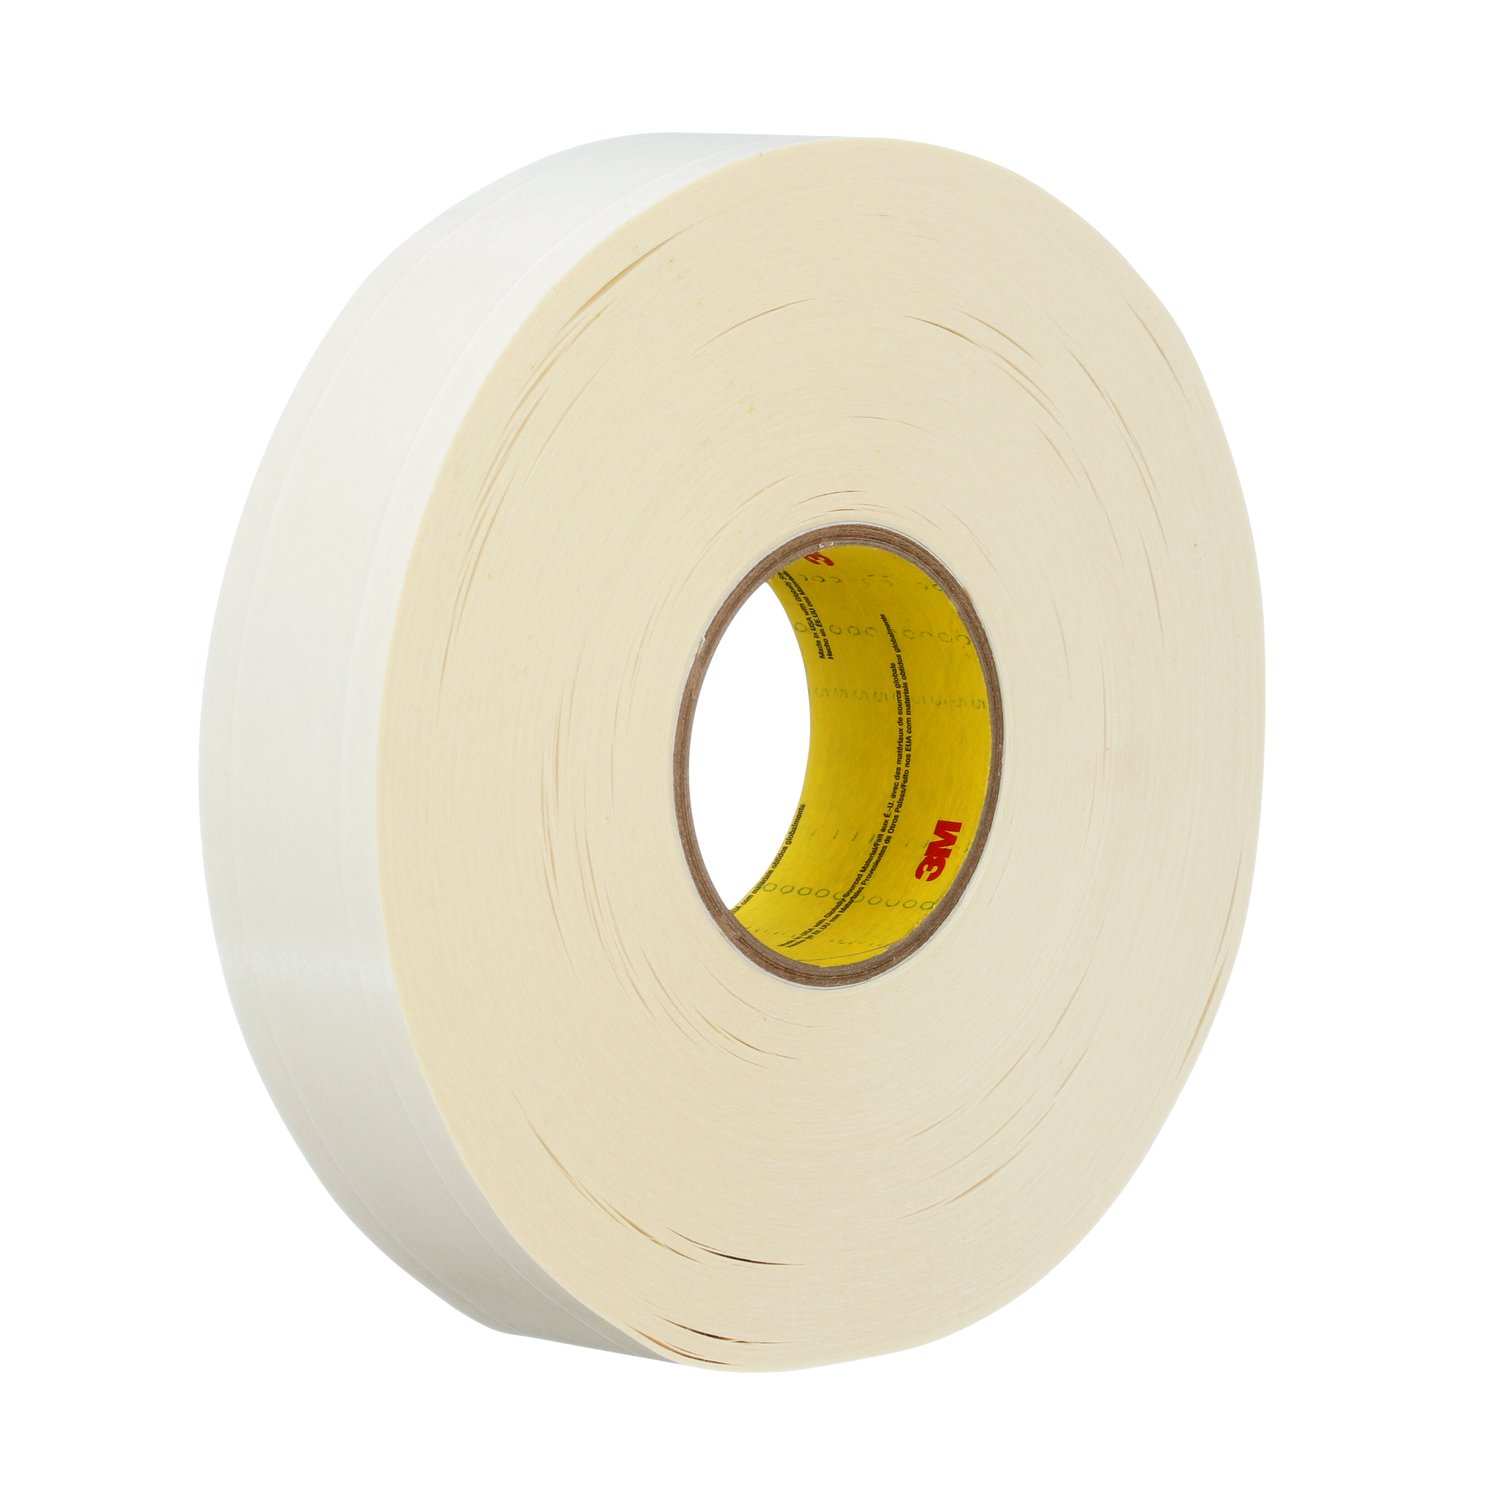 7100028174 - 3M Repulpable Heavy Duty Double Coated Tape R3287, White, 48 mm x 55 m,
5 mil, 24 rolls per case